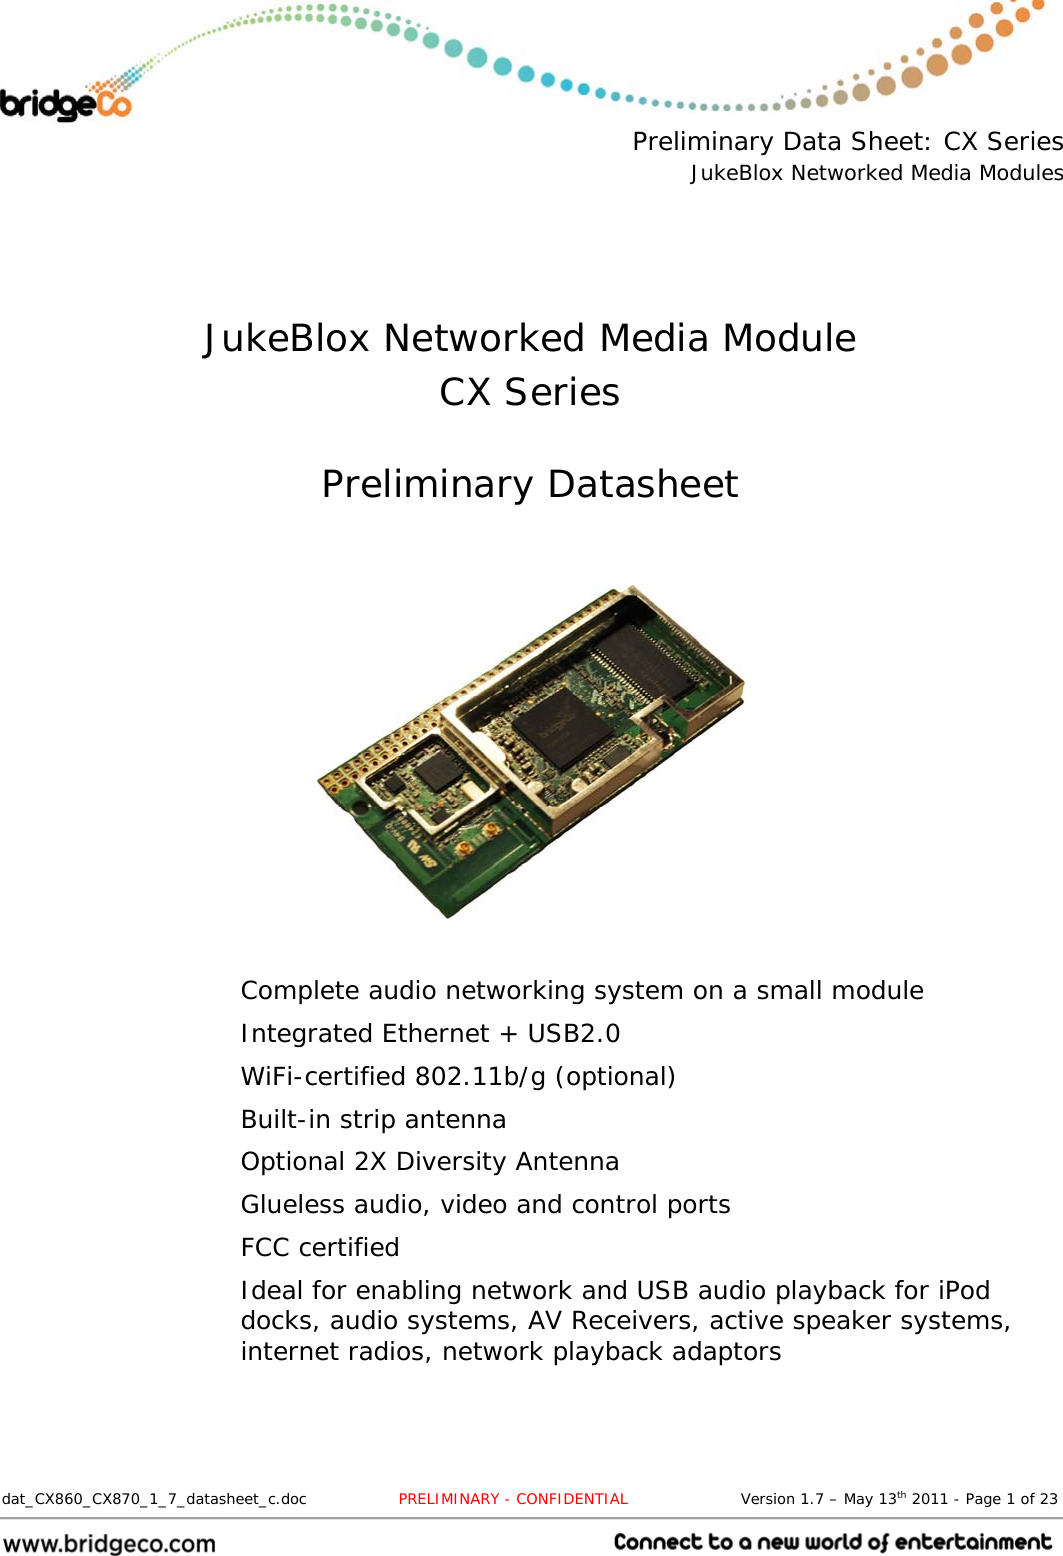  Preliminary Data Sheet: CX Series JukeBlox Networked Media Modules  dat_CX860_CX870_1_7_datasheet_c.doc                  PRELIMINARY - CONFIDENTIAL                      Version 1.7 – May 13th 2011 - Page 1 of 23                                   JukeBlox Networked Media Module CX Series  Preliminary Datasheet     Complete audio networking system on a small module Integrated Ethernet + USB2.0 WiFi-certified 802.11b/g (optional) Built-in strip antenna Optional 2X Diversity Antenna Glueless audio, video and control ports FCC certified Ideal for enabling network and USB audio playback for iPod docks, audio systems, AV Receivers, active speaker systems, internet radios, network playback adaptors  